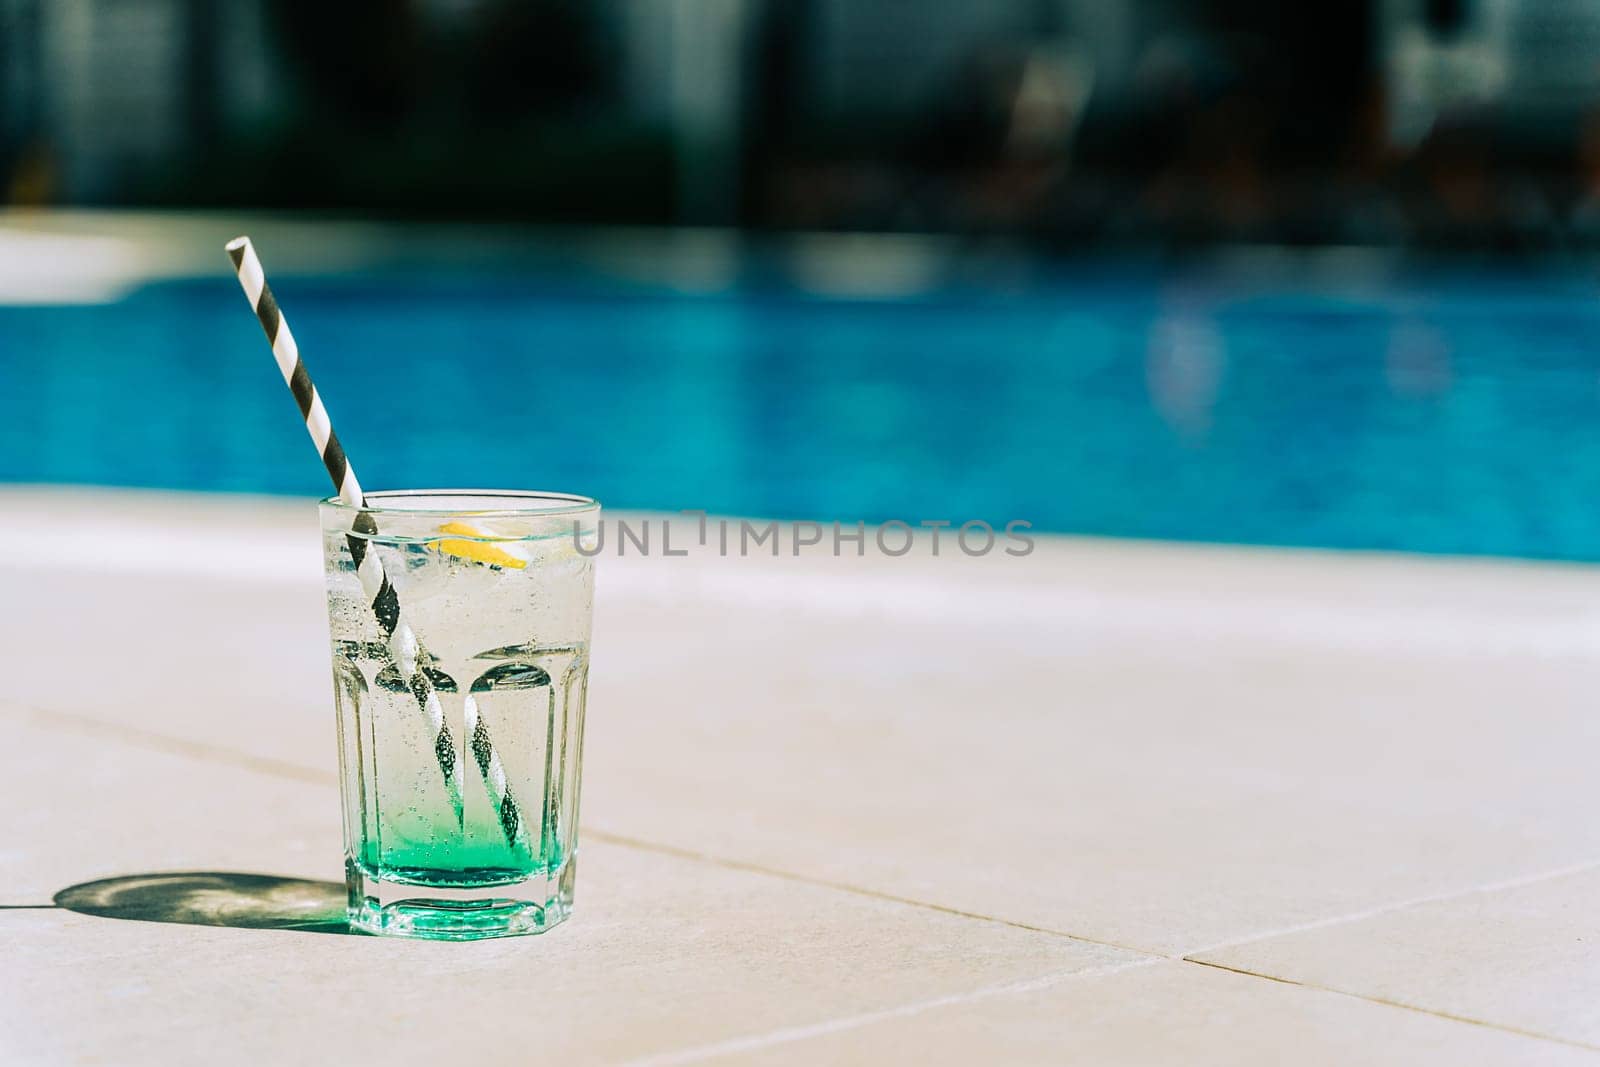 The glass of sparkling mint fruit cocktail standing by the swimming pool. Summer alcohol free drink by the hotel pool. Hello summer holiday vacation by Ostanina